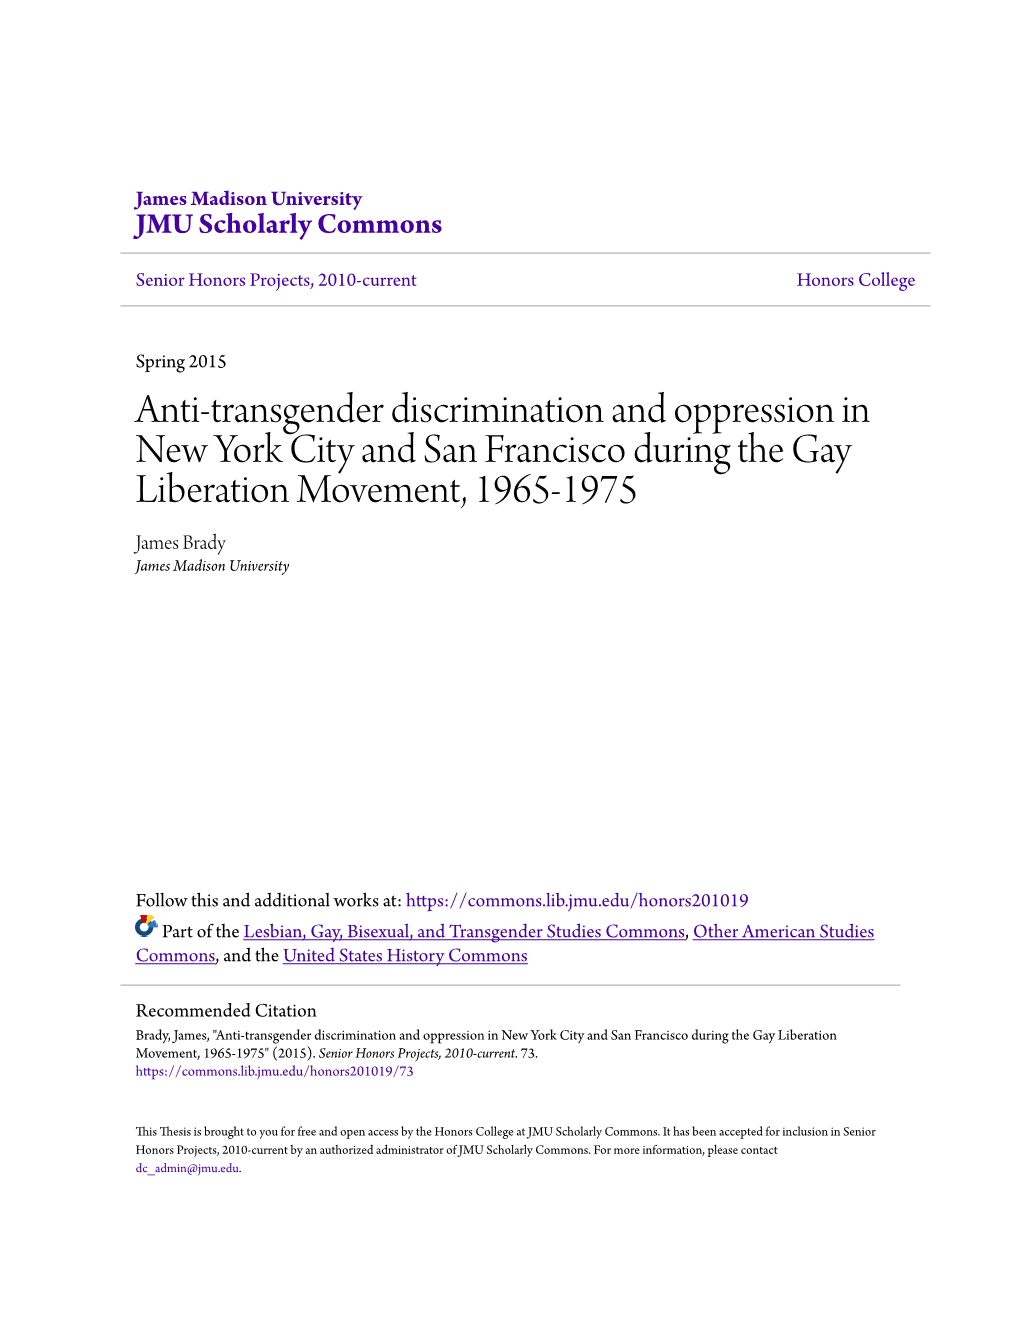 Anti-Transgender Discrimination and Oppression in New York City and San Francisco During the Gay Liberation Movement, 1965-1975 James Brady James Madison University